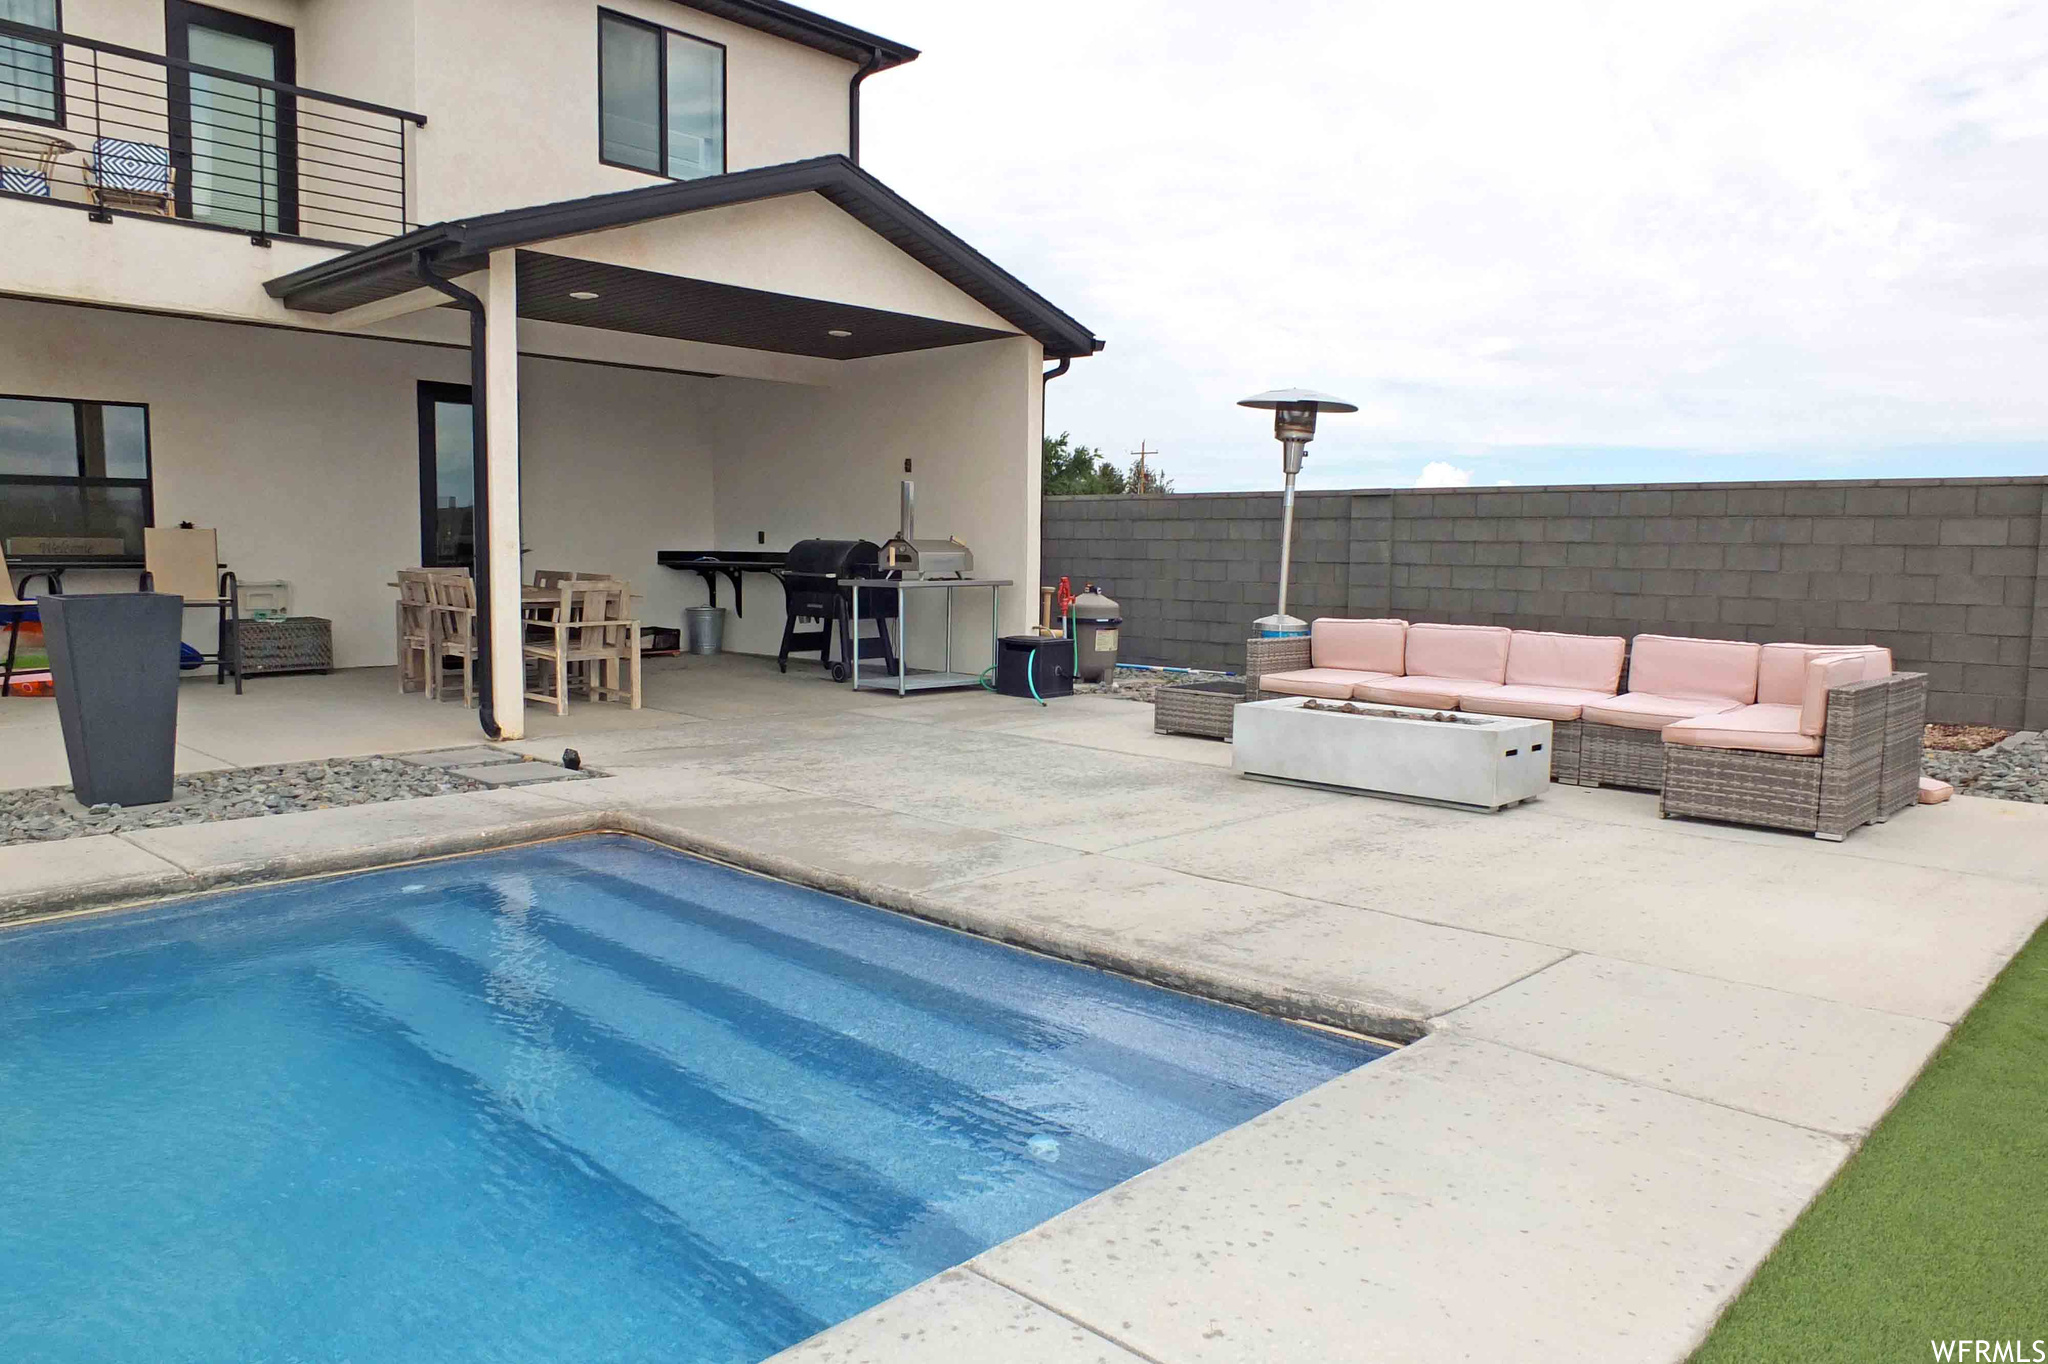 View of pool featuring a patio area, area for grilling, and outdoor lounge area